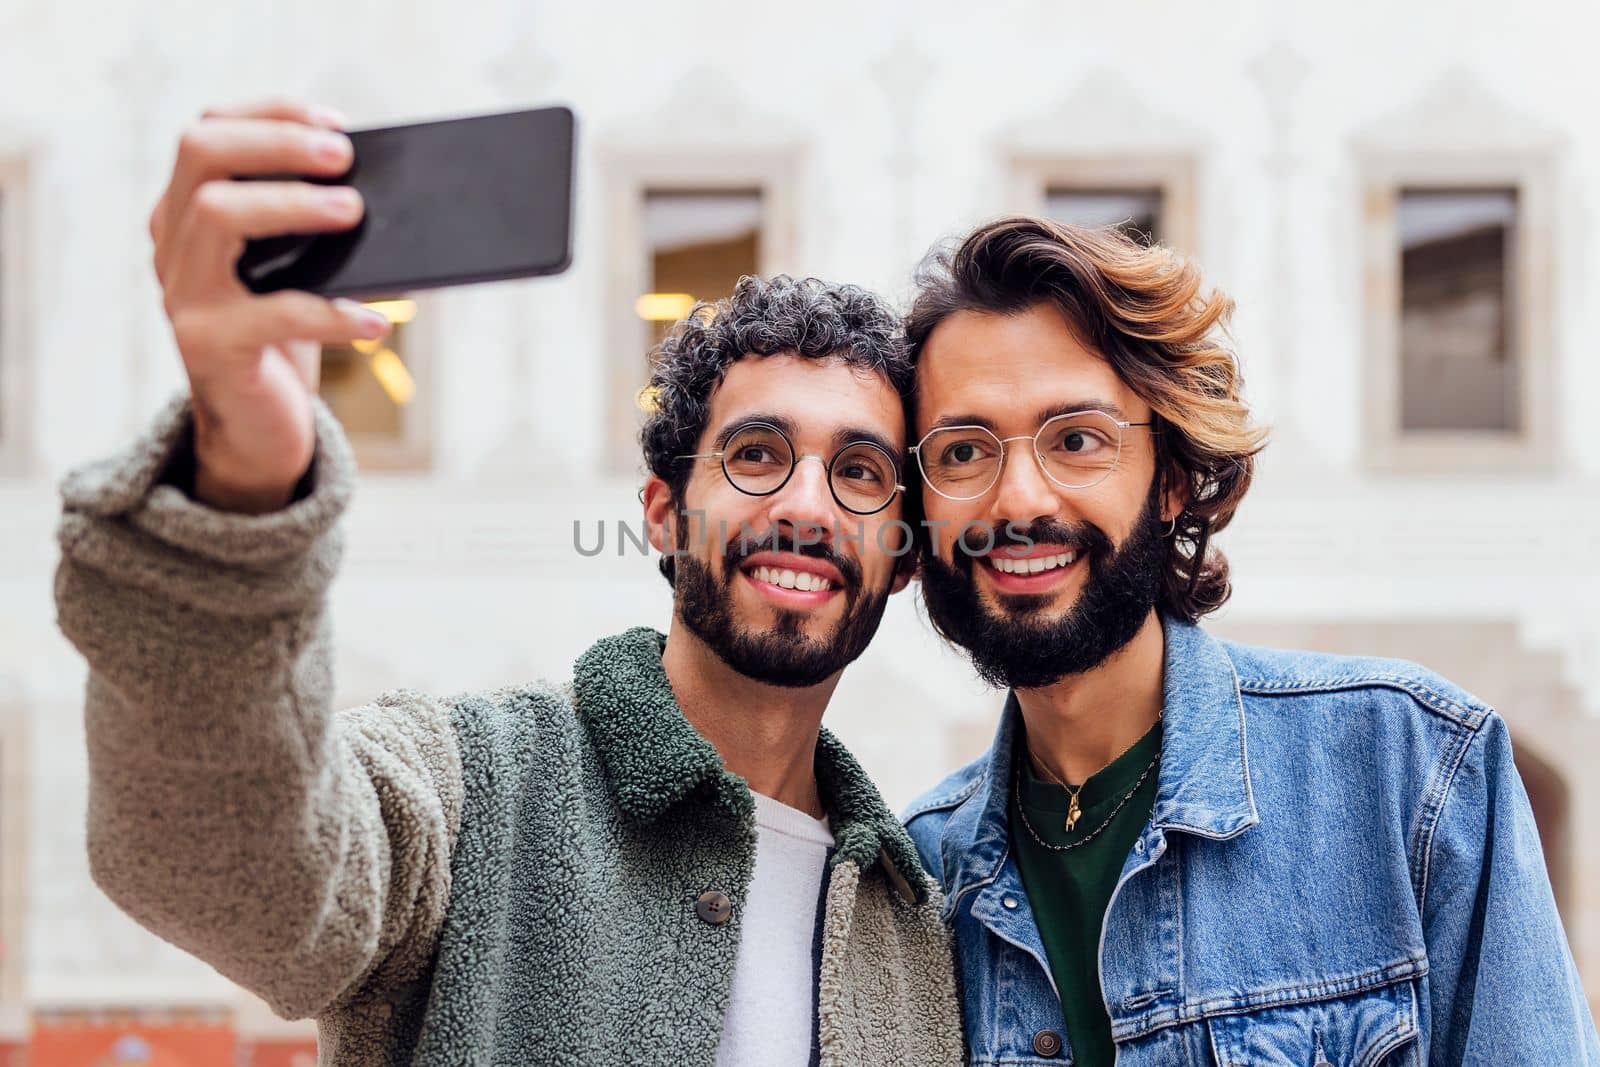 gay male couple taking a selfie photo with their mobile phone in the street, concept of urban lifestyle and love between people of the same sex